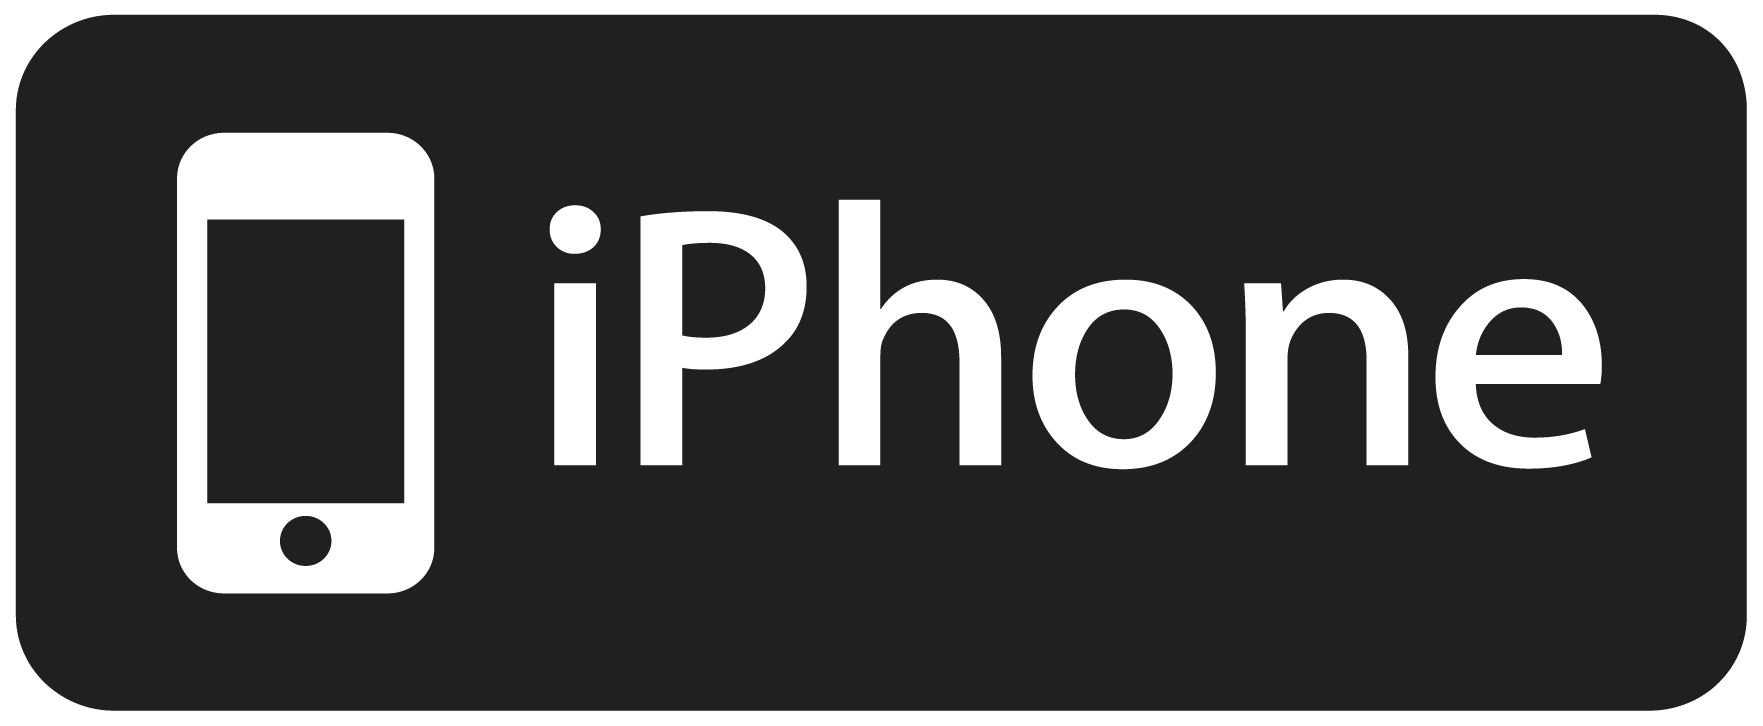 iphone mobile phone logo png #534